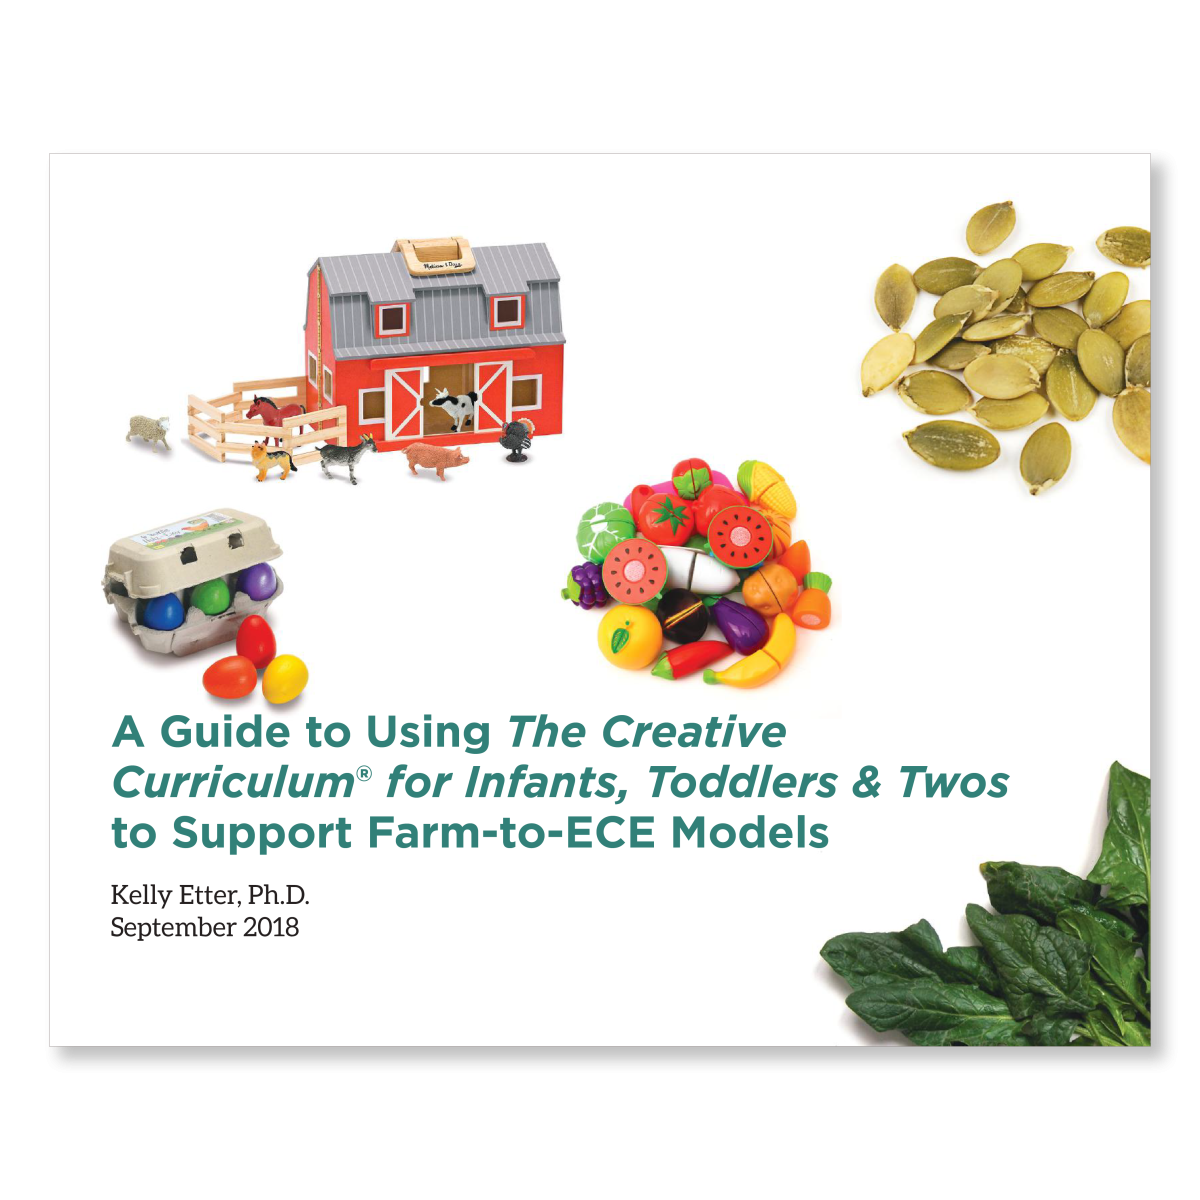 A Guide to Using The Creative Curriculum Infants Toddlers Twos to Support Farm-to-ECE Models